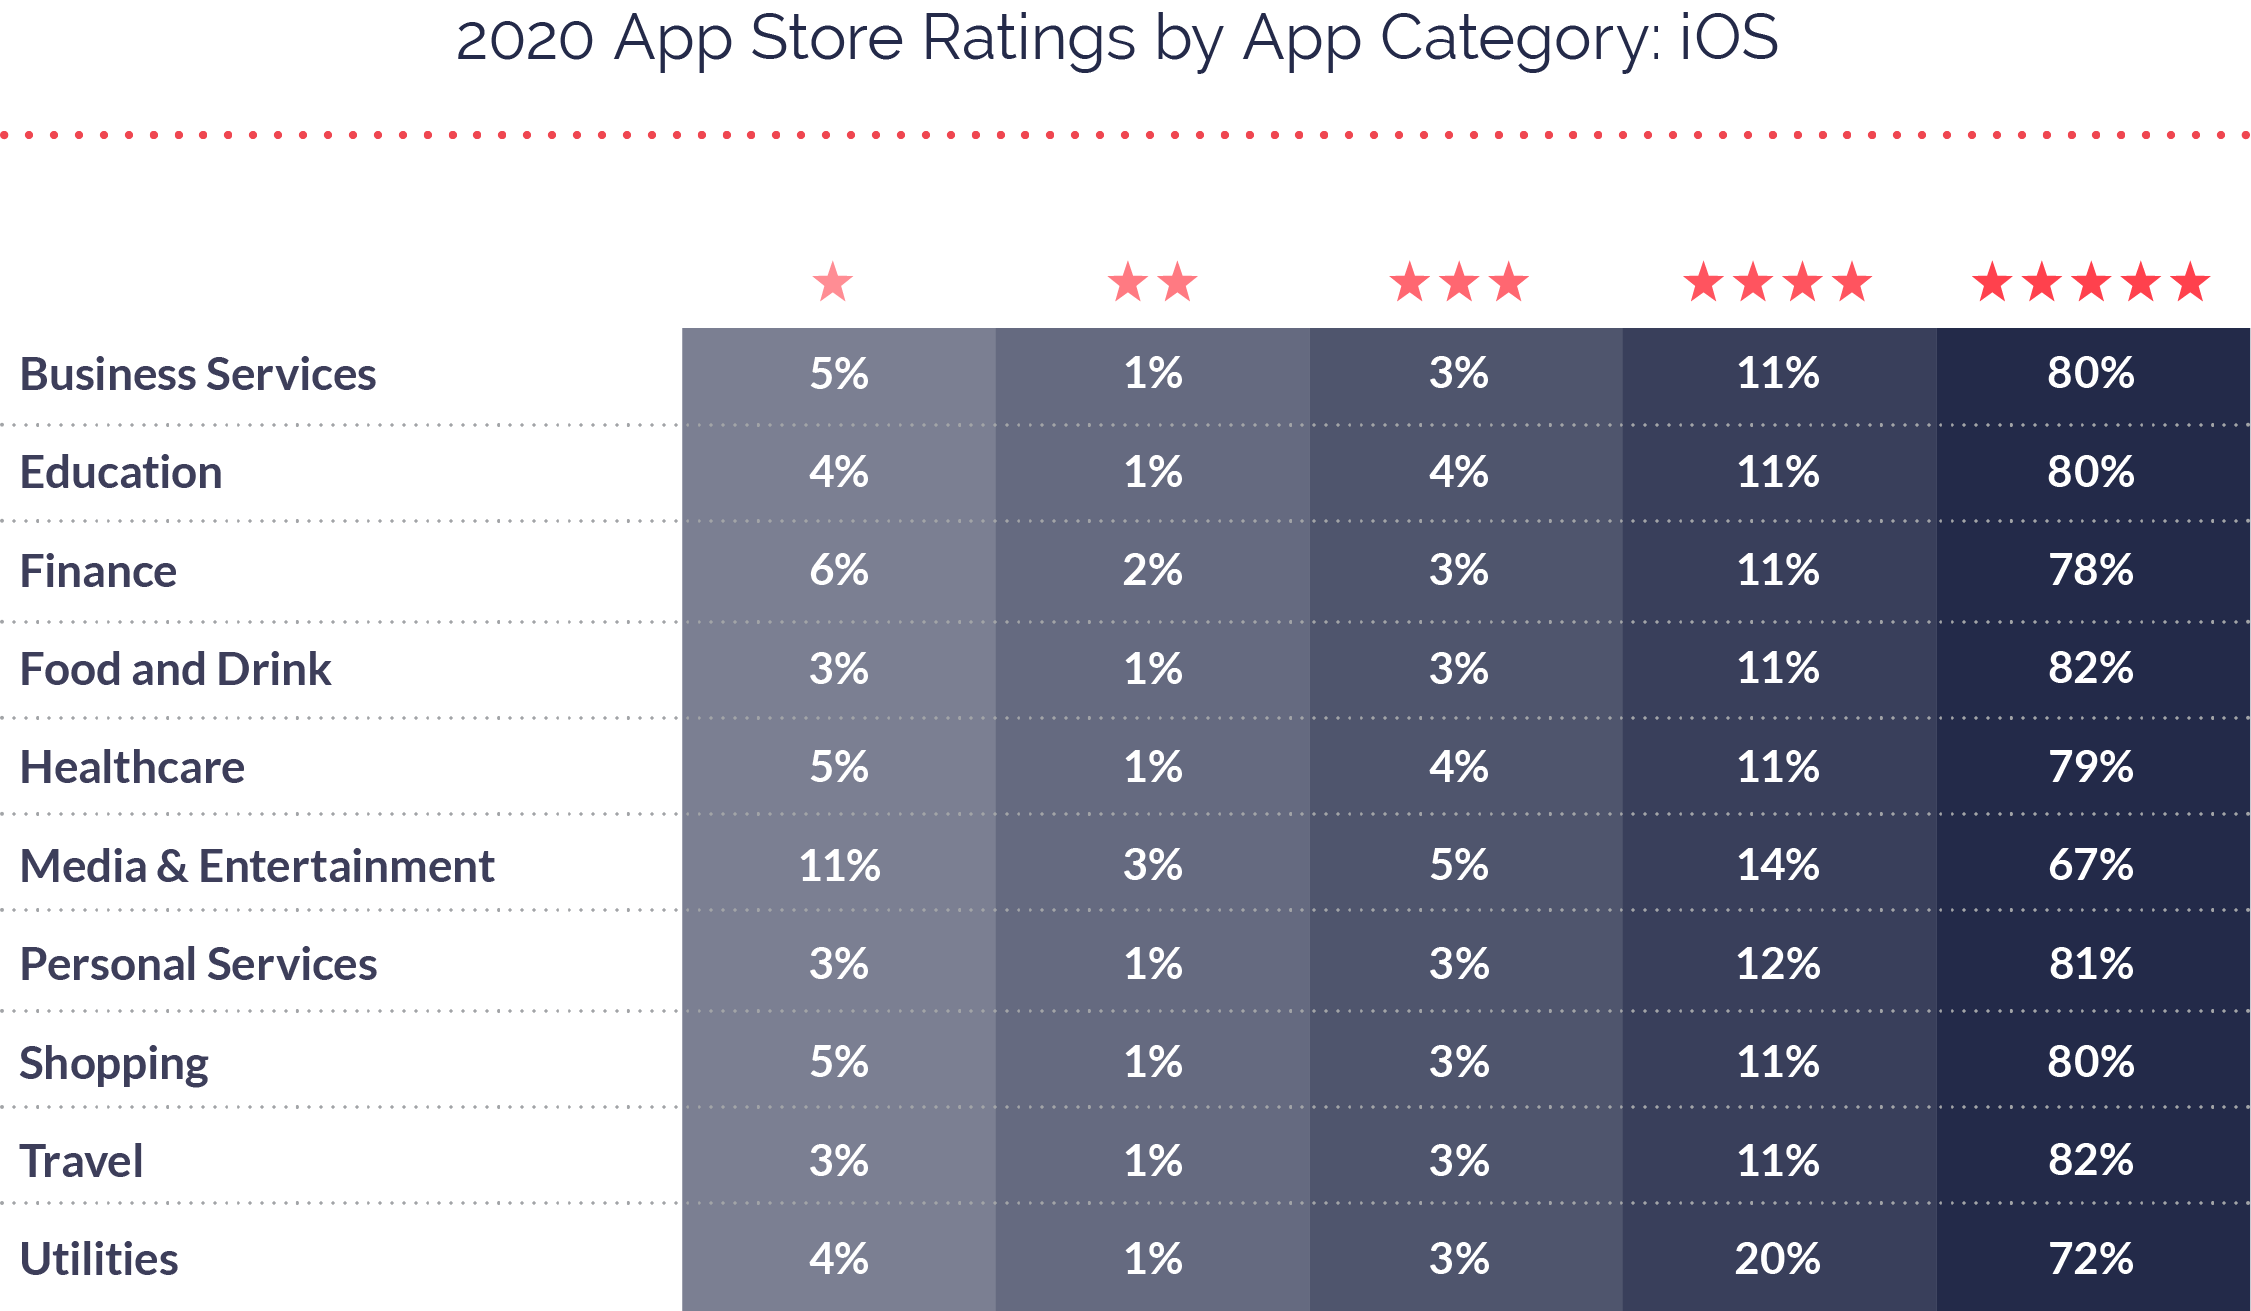 irony miser cleaner App Ratings and Reviews: 2021 Benchmarks - Business 2 Community